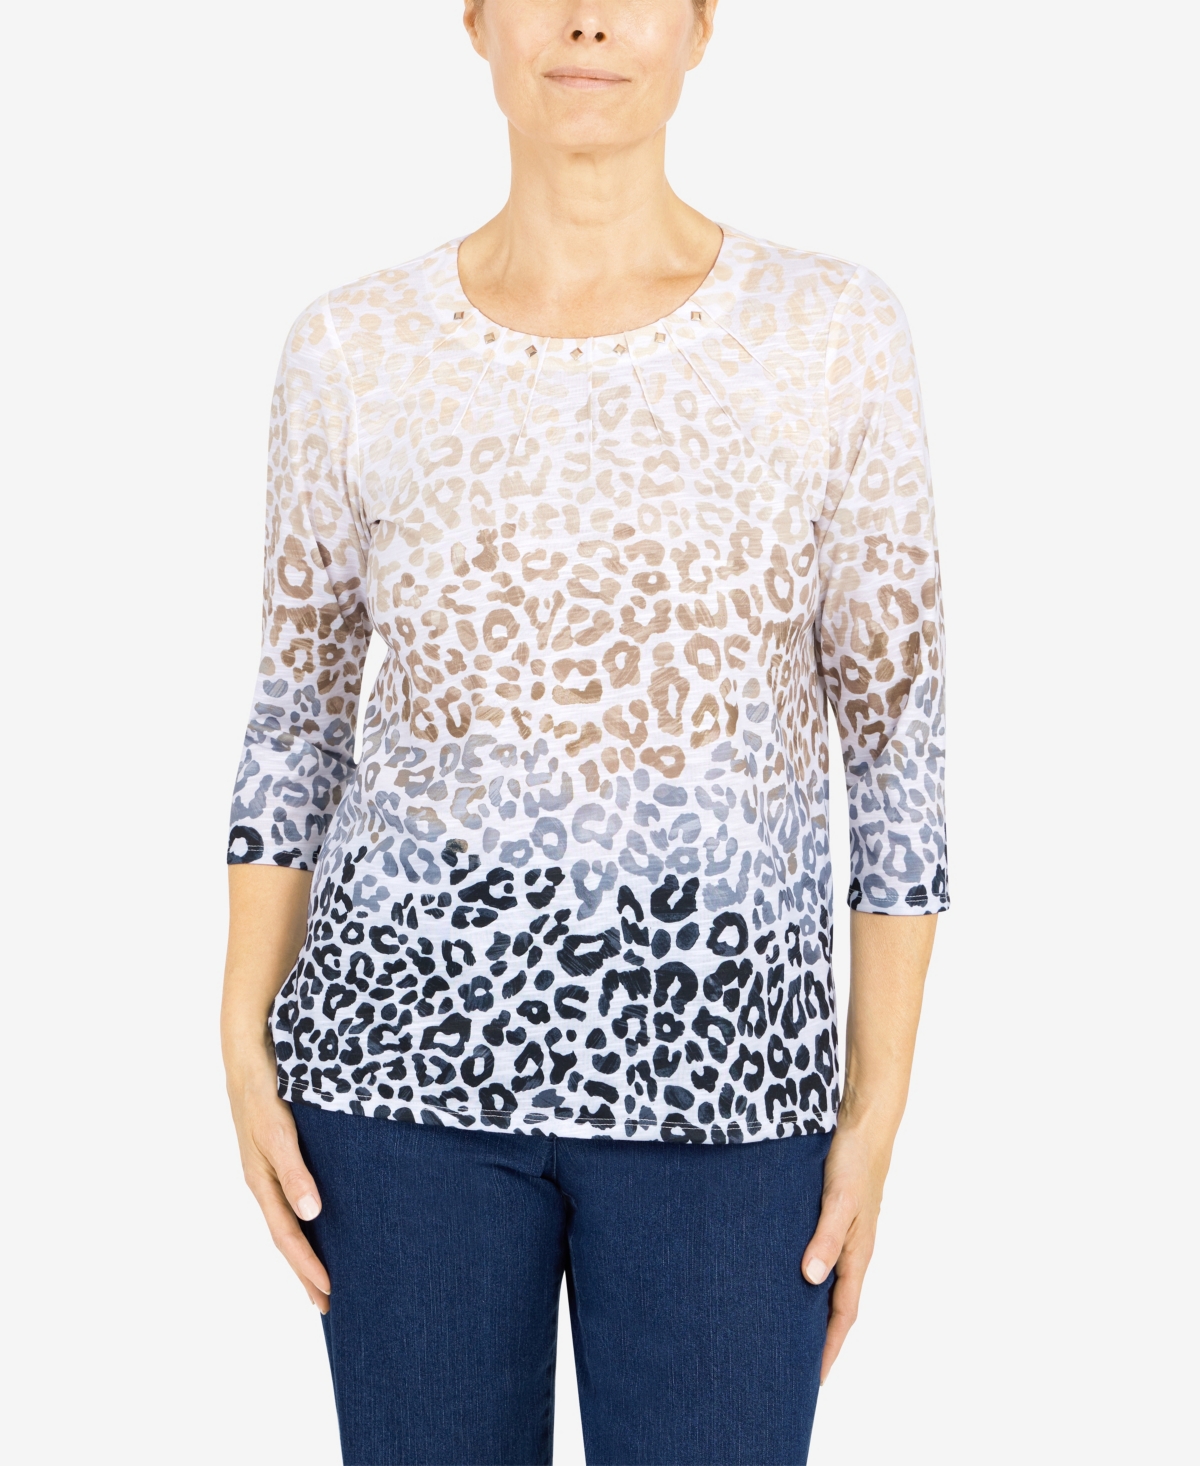 ALFRED DUNNER WOMEN'S CLASSICS ANIMAL OMBRE KNIT 3/4 SLEEVE TOP